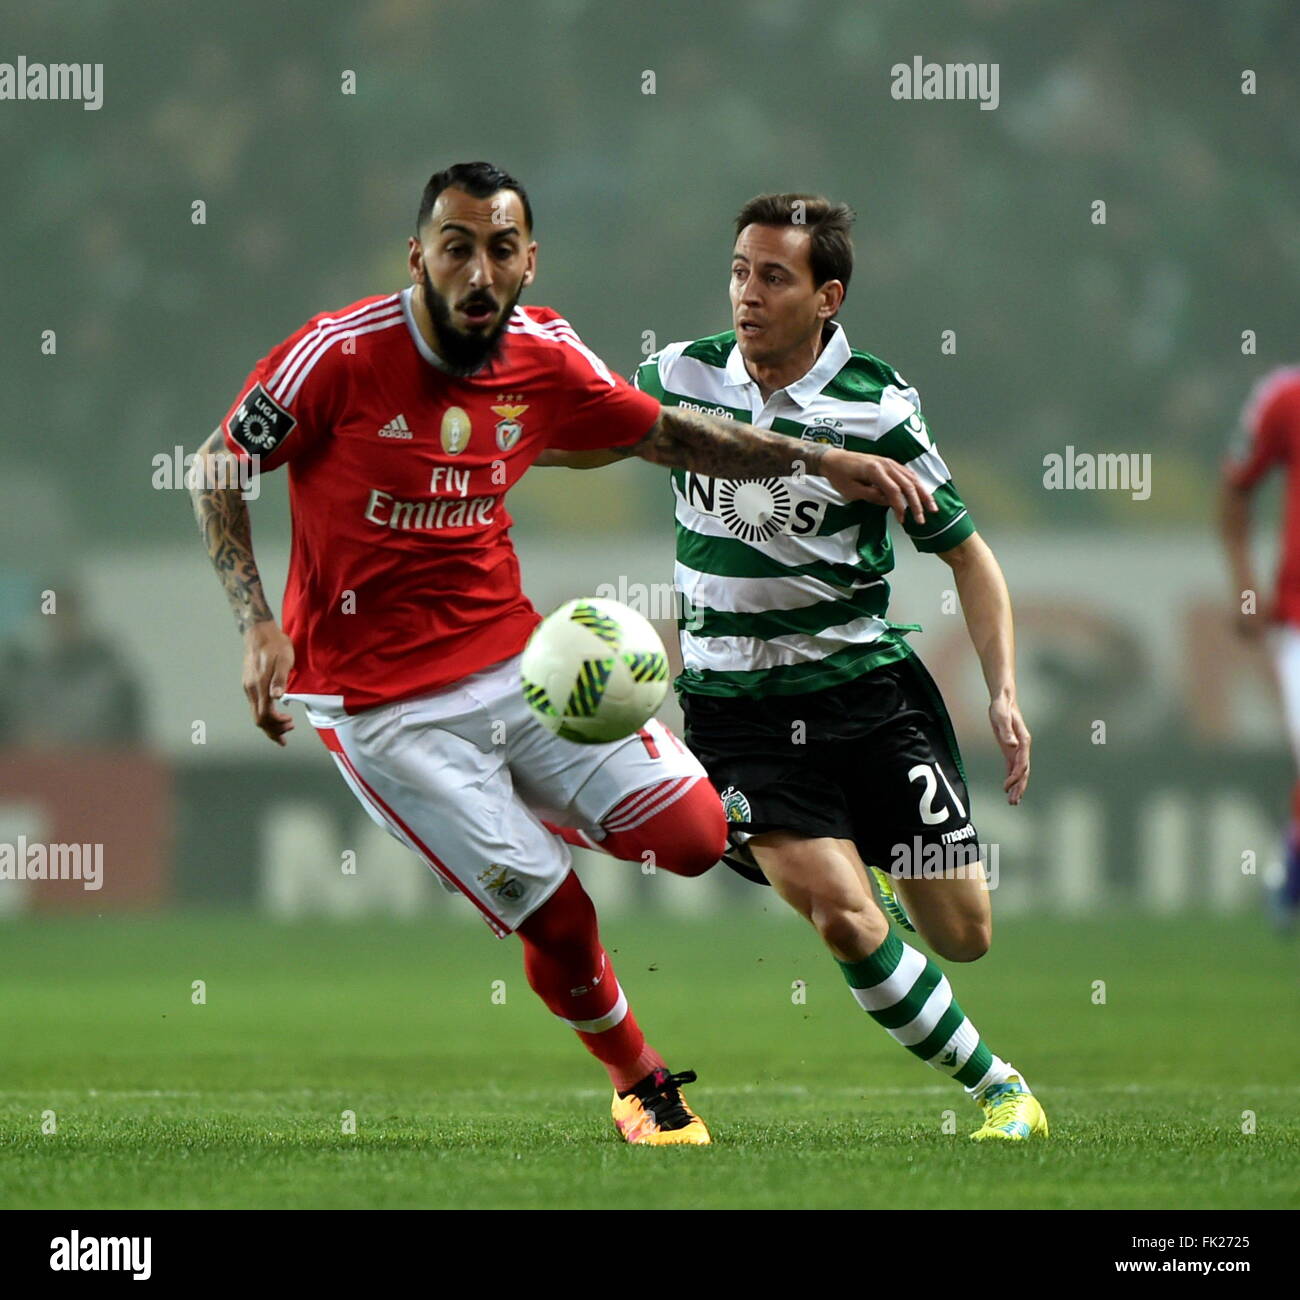 Lisbon. 5th Mar, 2016. Sporting's Joao Pereira (R) vies the ball with Benfica's Mitroglou during the Portuguese league football match between Sporting CP and SL Benfica at the Jose Alvalade stadium in Lisbon on Mar. 5, 2016. Sporting lost 0-1. © Zhang Liyun/Xinhua/Alamy Live News Stock Photo